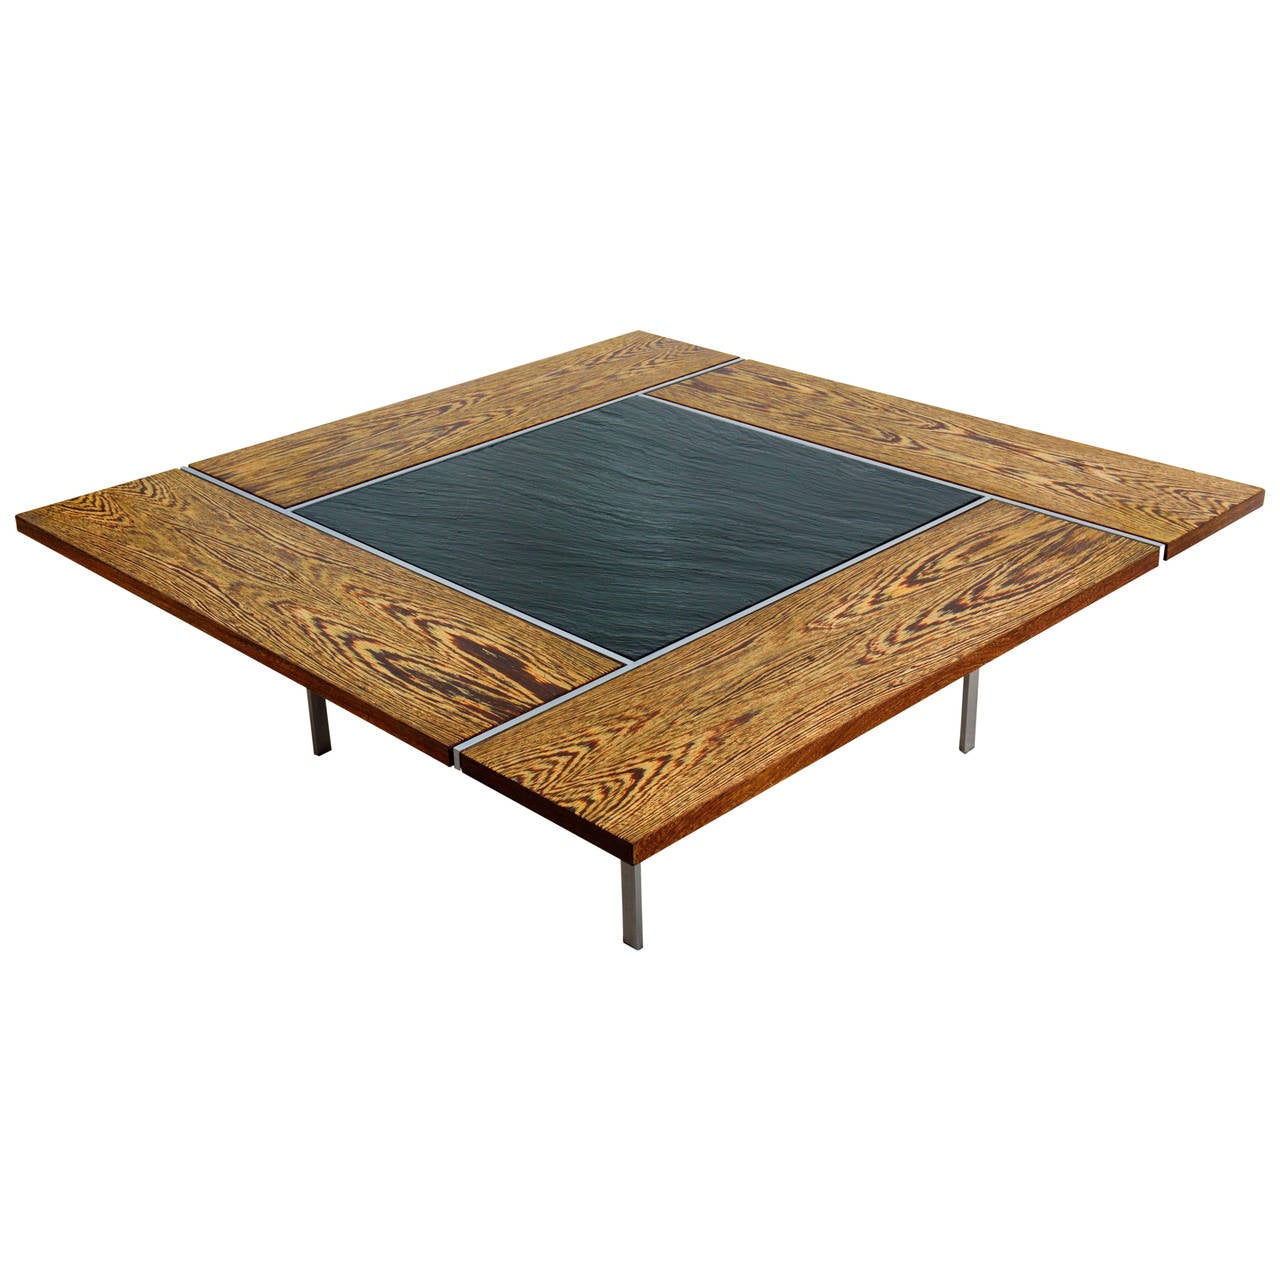 Square coffee table by Preben Fabricius
Manufactured by BO-EX in 1970
Made of wenge wood, slate and chromed steel

Inspired by functionalism and firmness of Scandinavian design, which has had considerable influence on the aesthetics of the